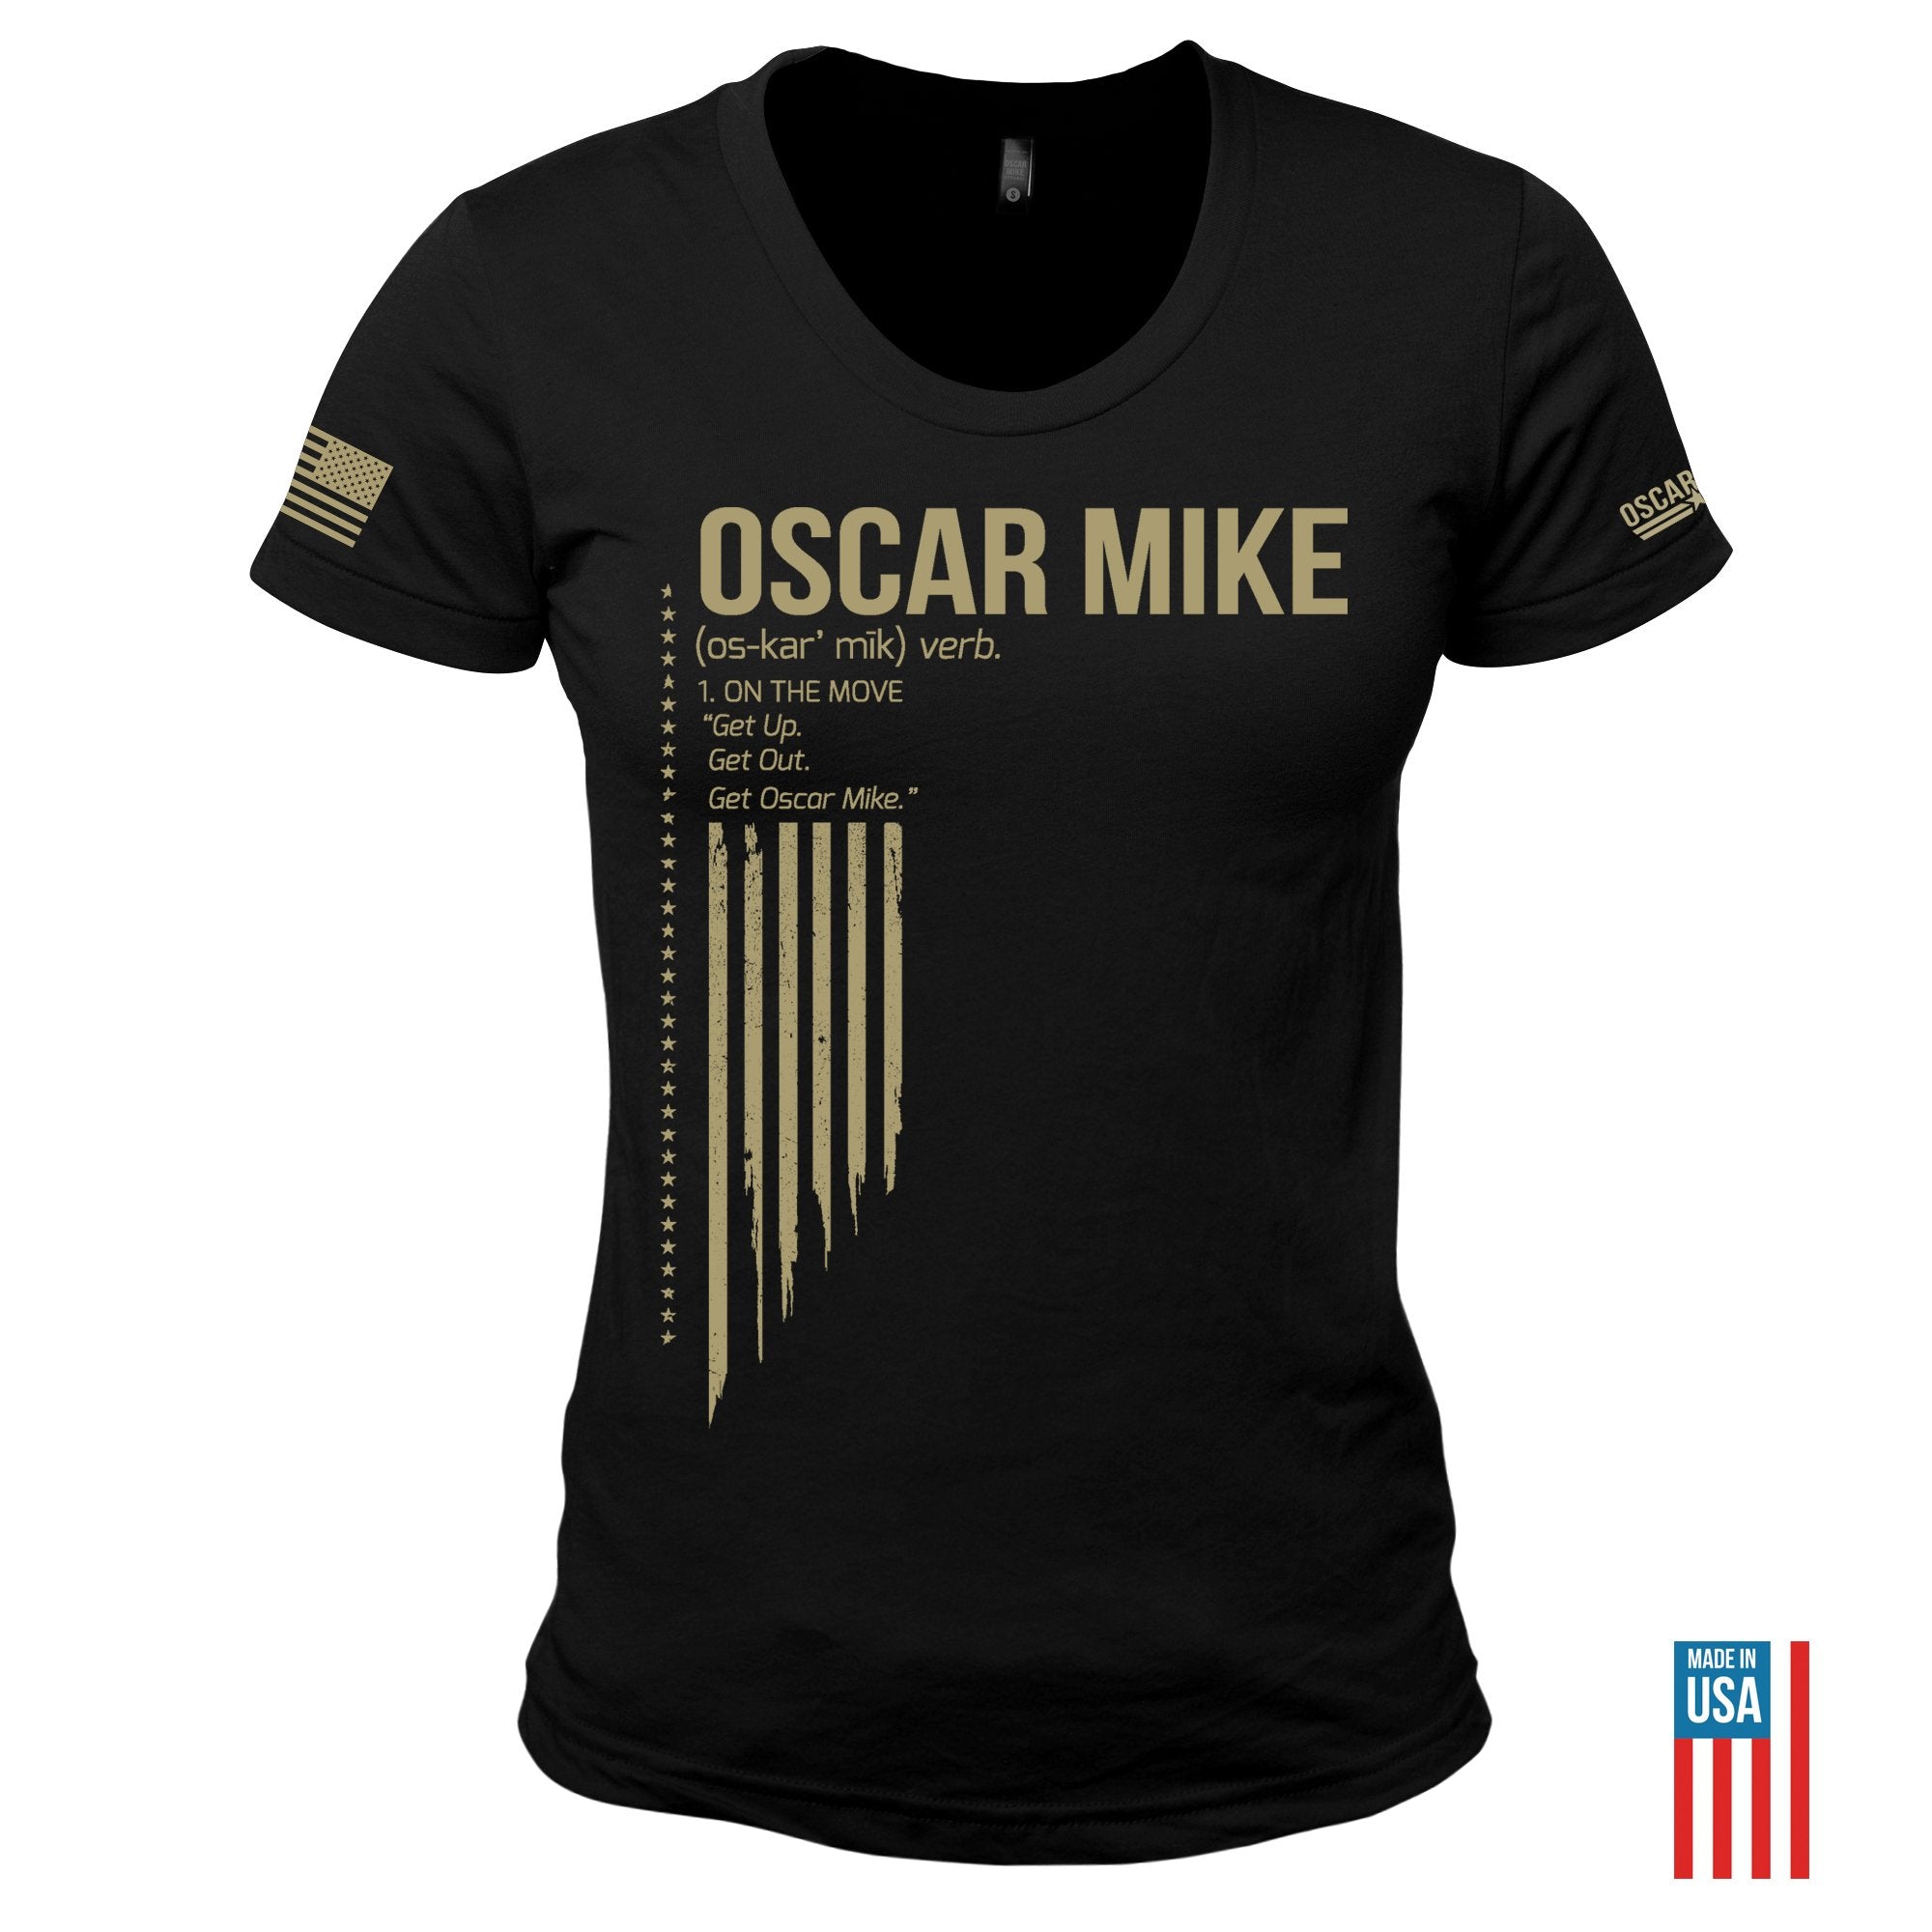 Women's OM Definition T-Shirt from Oscar Mike Apparel